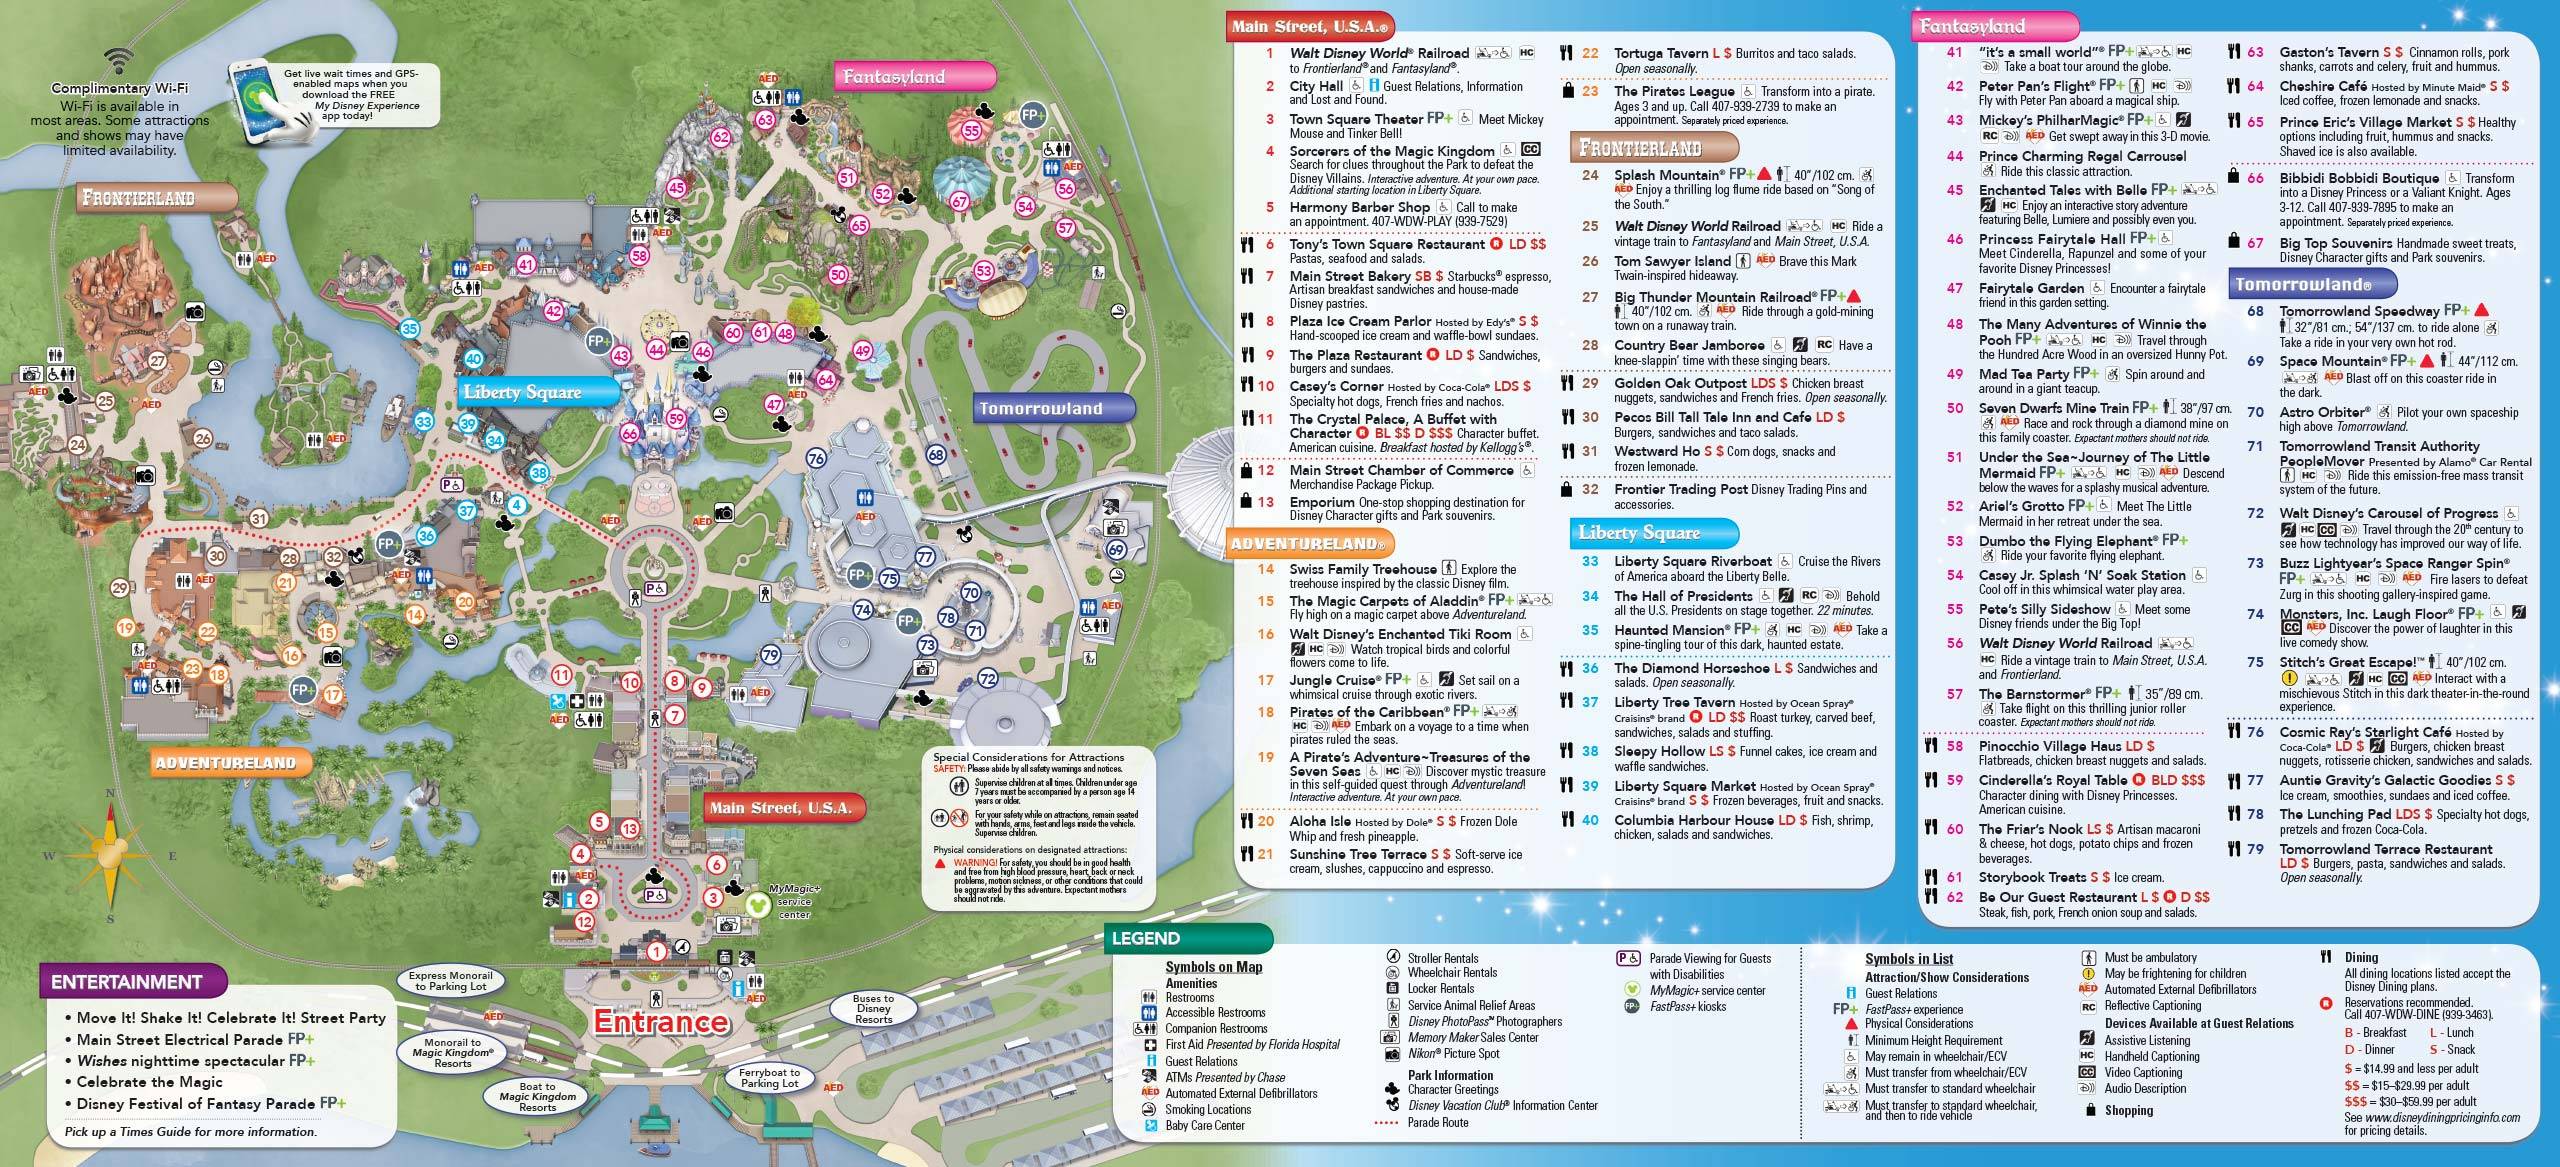 Seven Dwarfs Mine Train takes the front cover of the Magic Kingdom guide map 